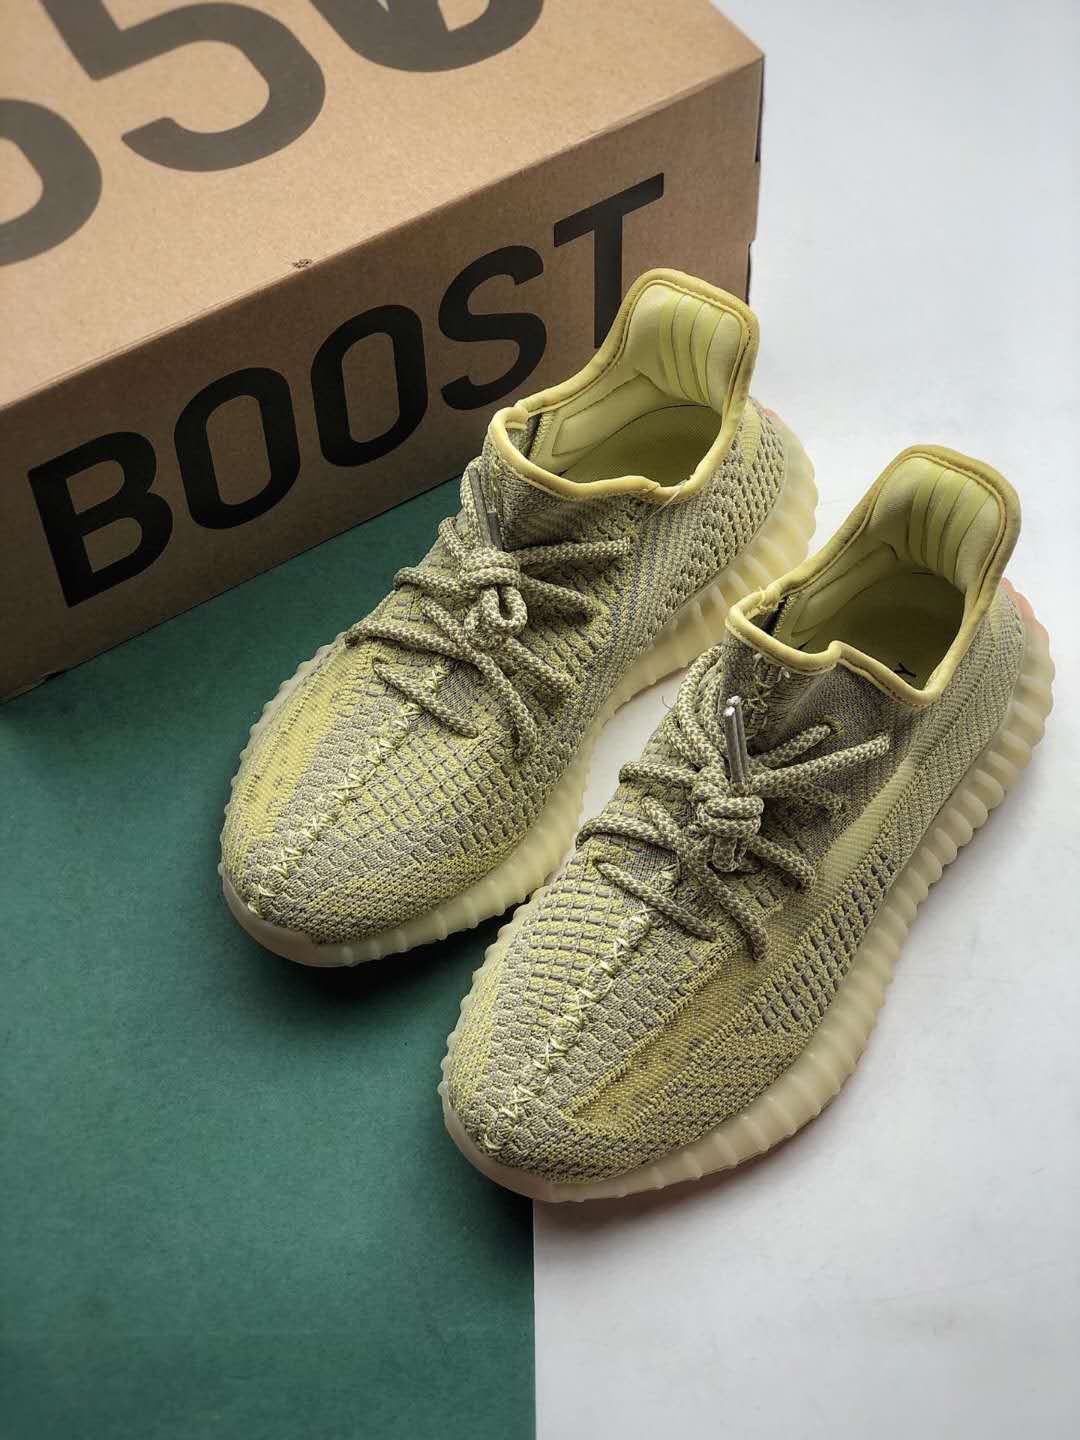 Adidas Yeezy Boost 350 V2 'Antlia Non-Reflective' FV3250 - Limited Edition Sneakers